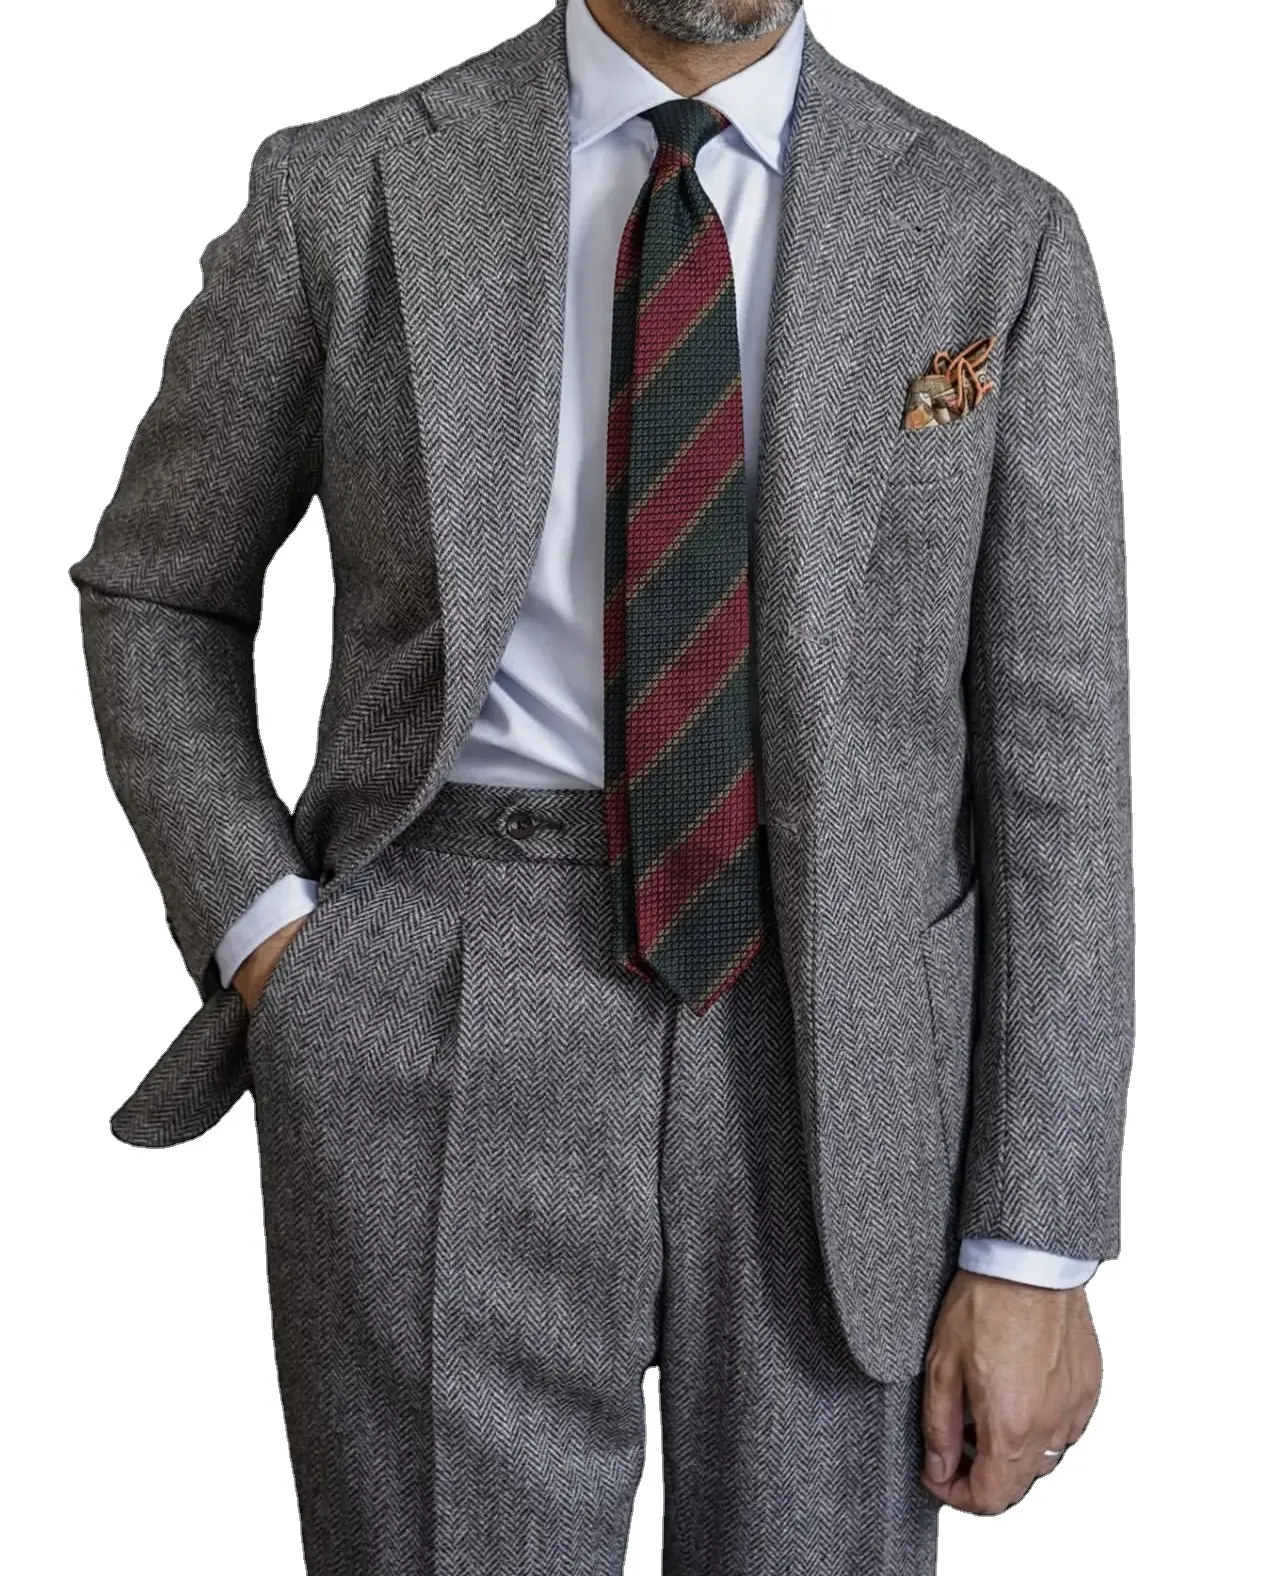 Winter Warm Men's Suits Gray Herringbone Tweed 2 Piece Slim Fit Notched Collar Blazer Sets Hunters Clothing Male Casual Sets